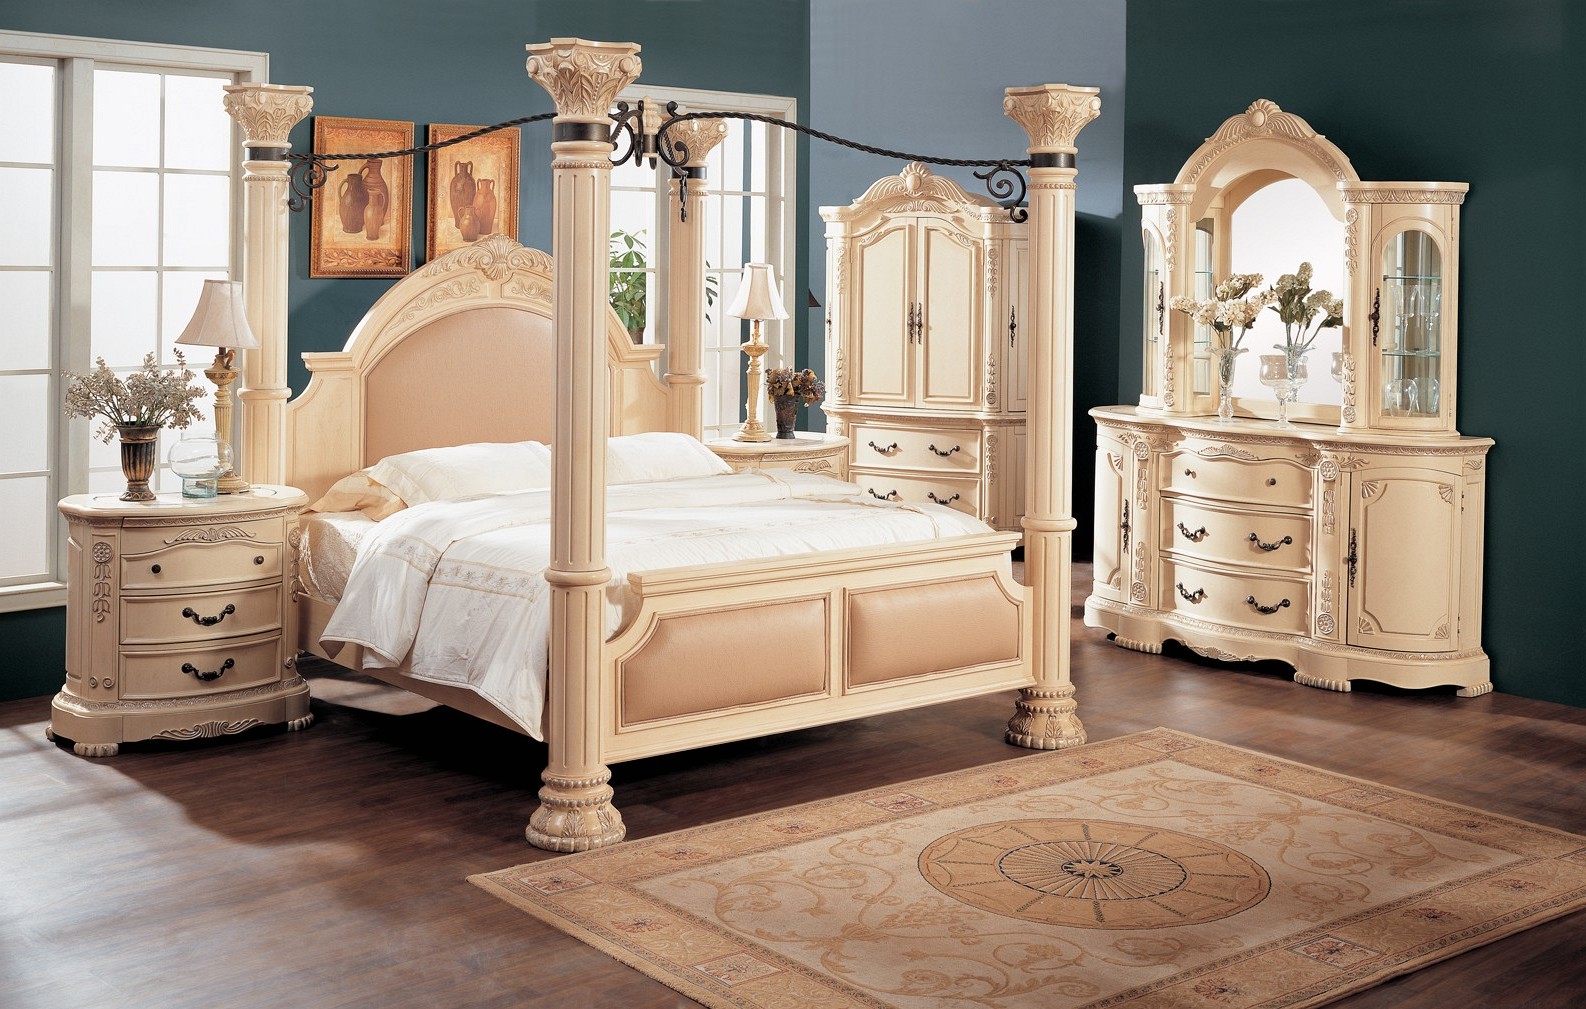 pictures of antique bedroom furniture